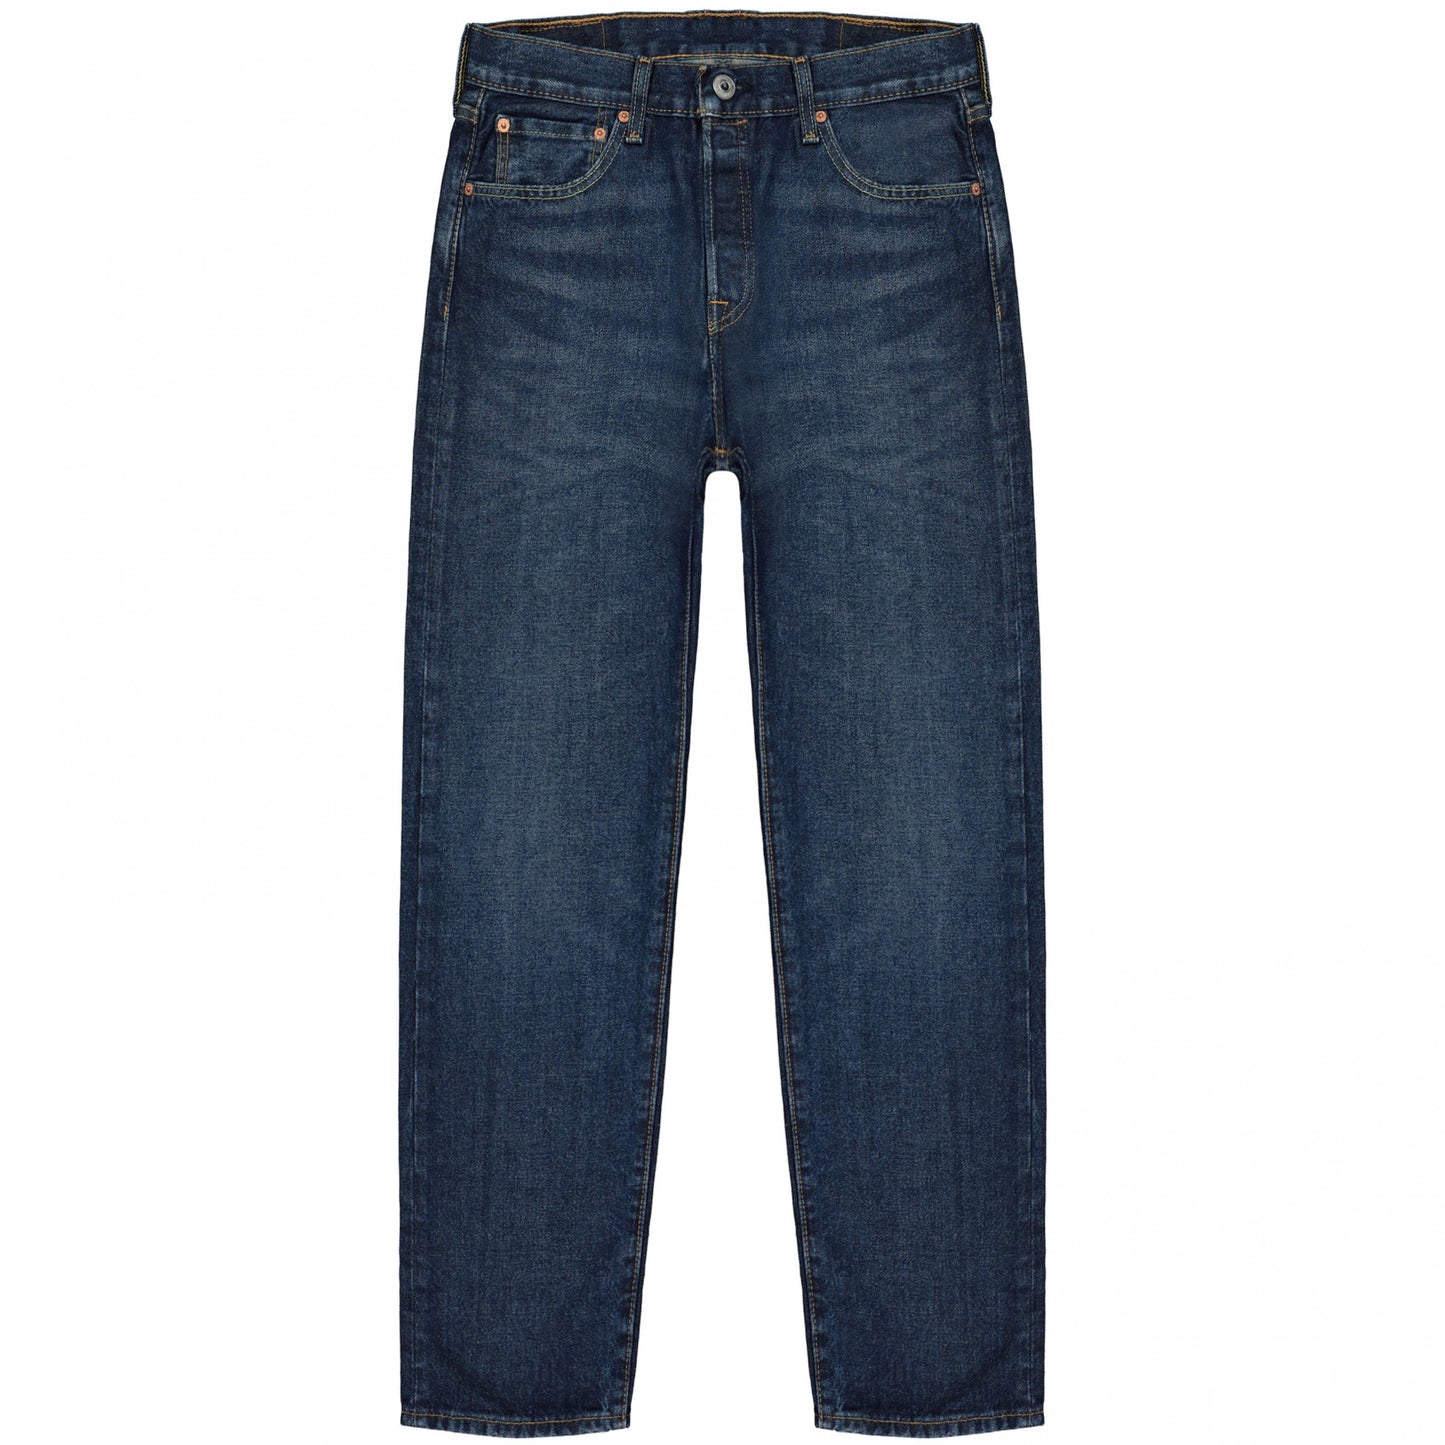 Jeans Levi's 501 10ft Over Head